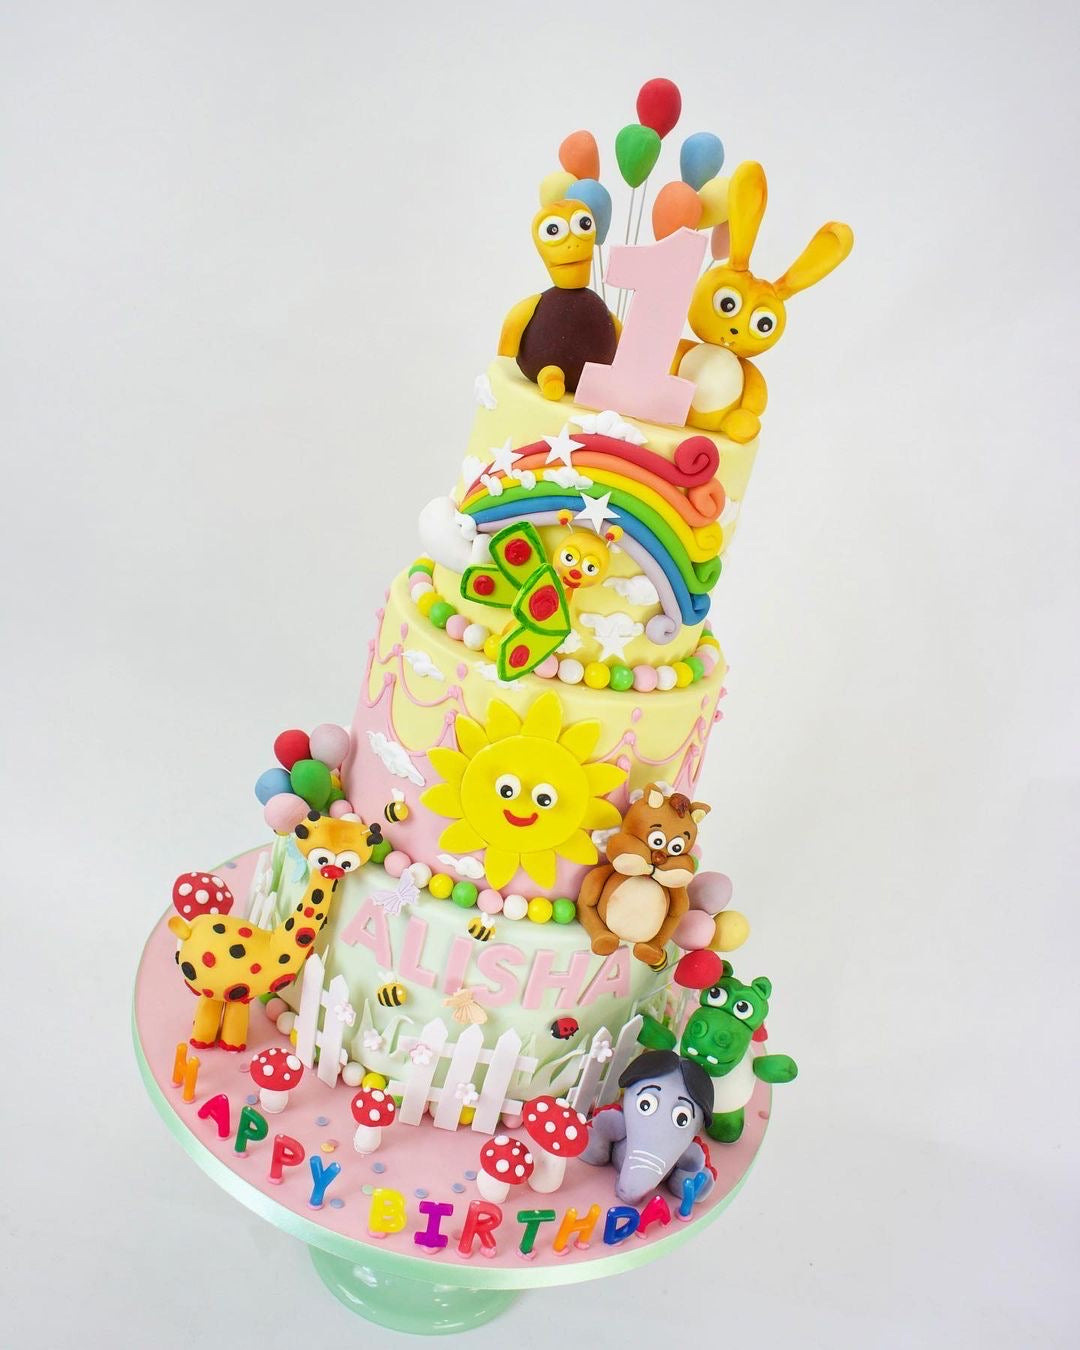 Charlie, Egg bird and Baby TV :) - Decorated Cake by - CakesDecor